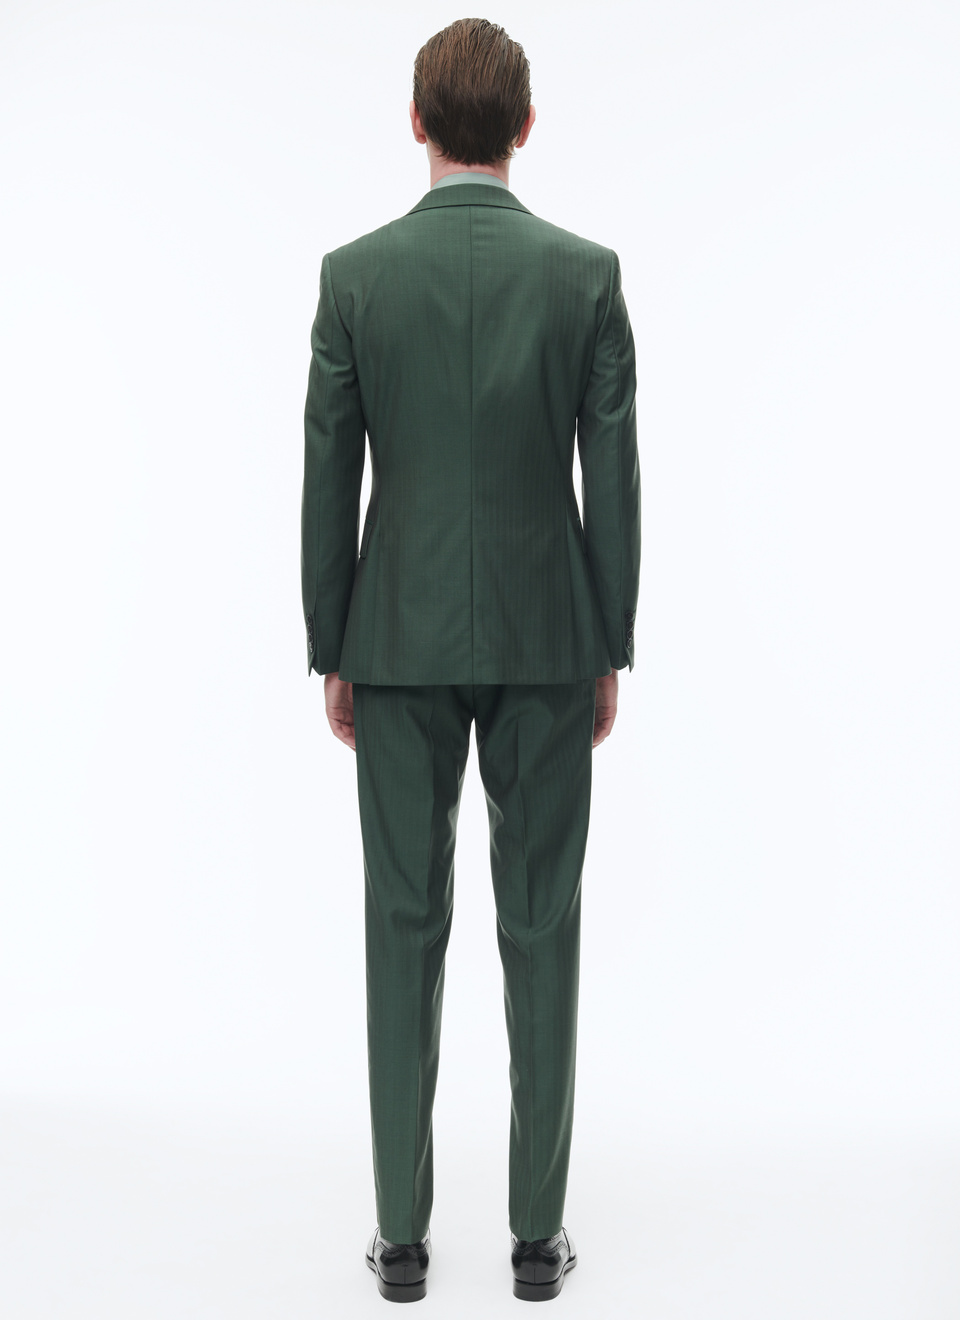 British Racing Green Slim Fit Suit for Men - Fursac A2AVAY-AA08-A011